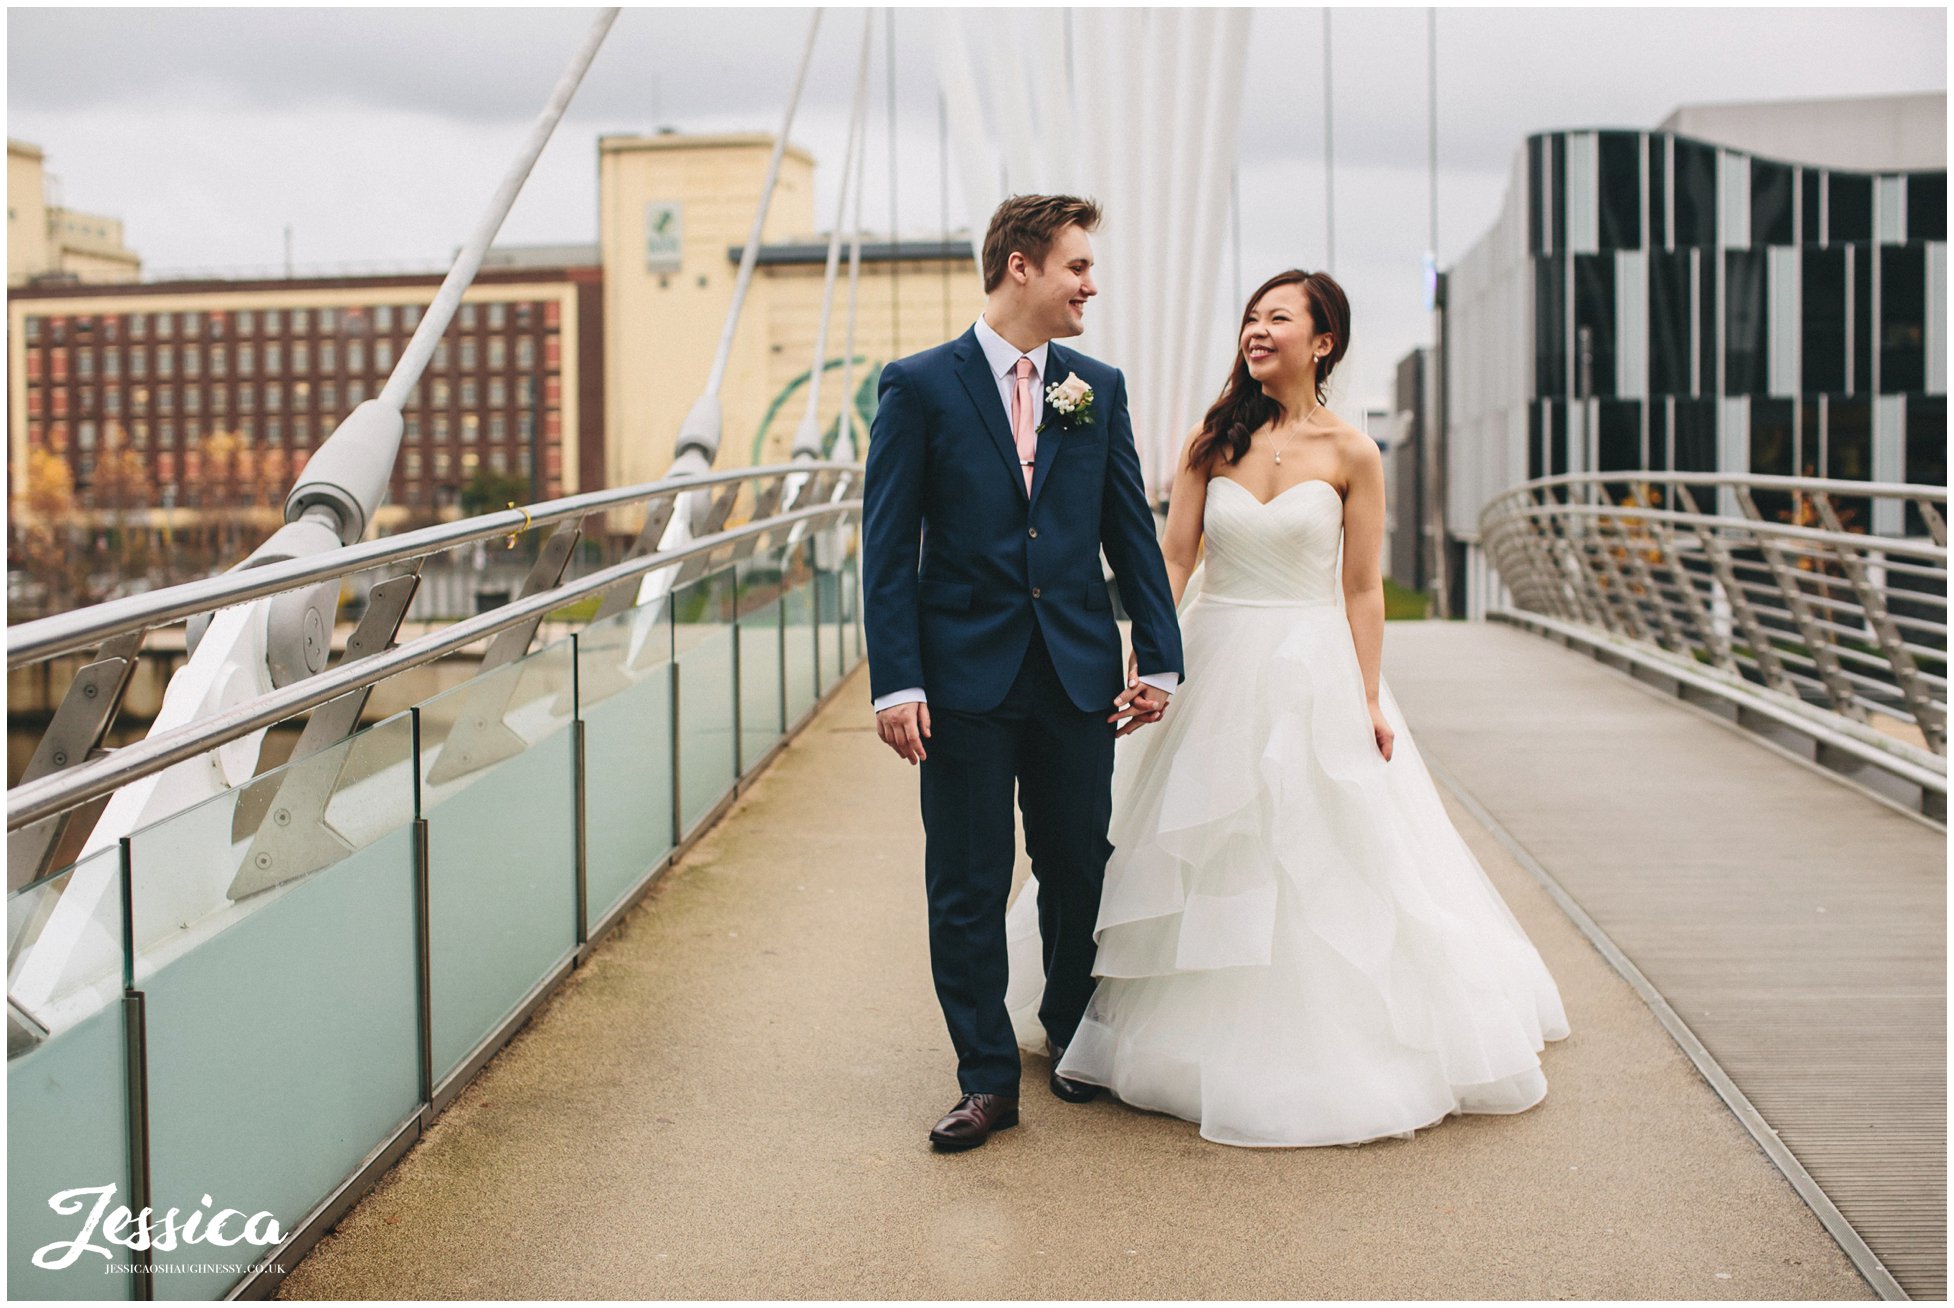 newly weds walk hand in hand over The Media City Footbridge - manchester wedding photographer